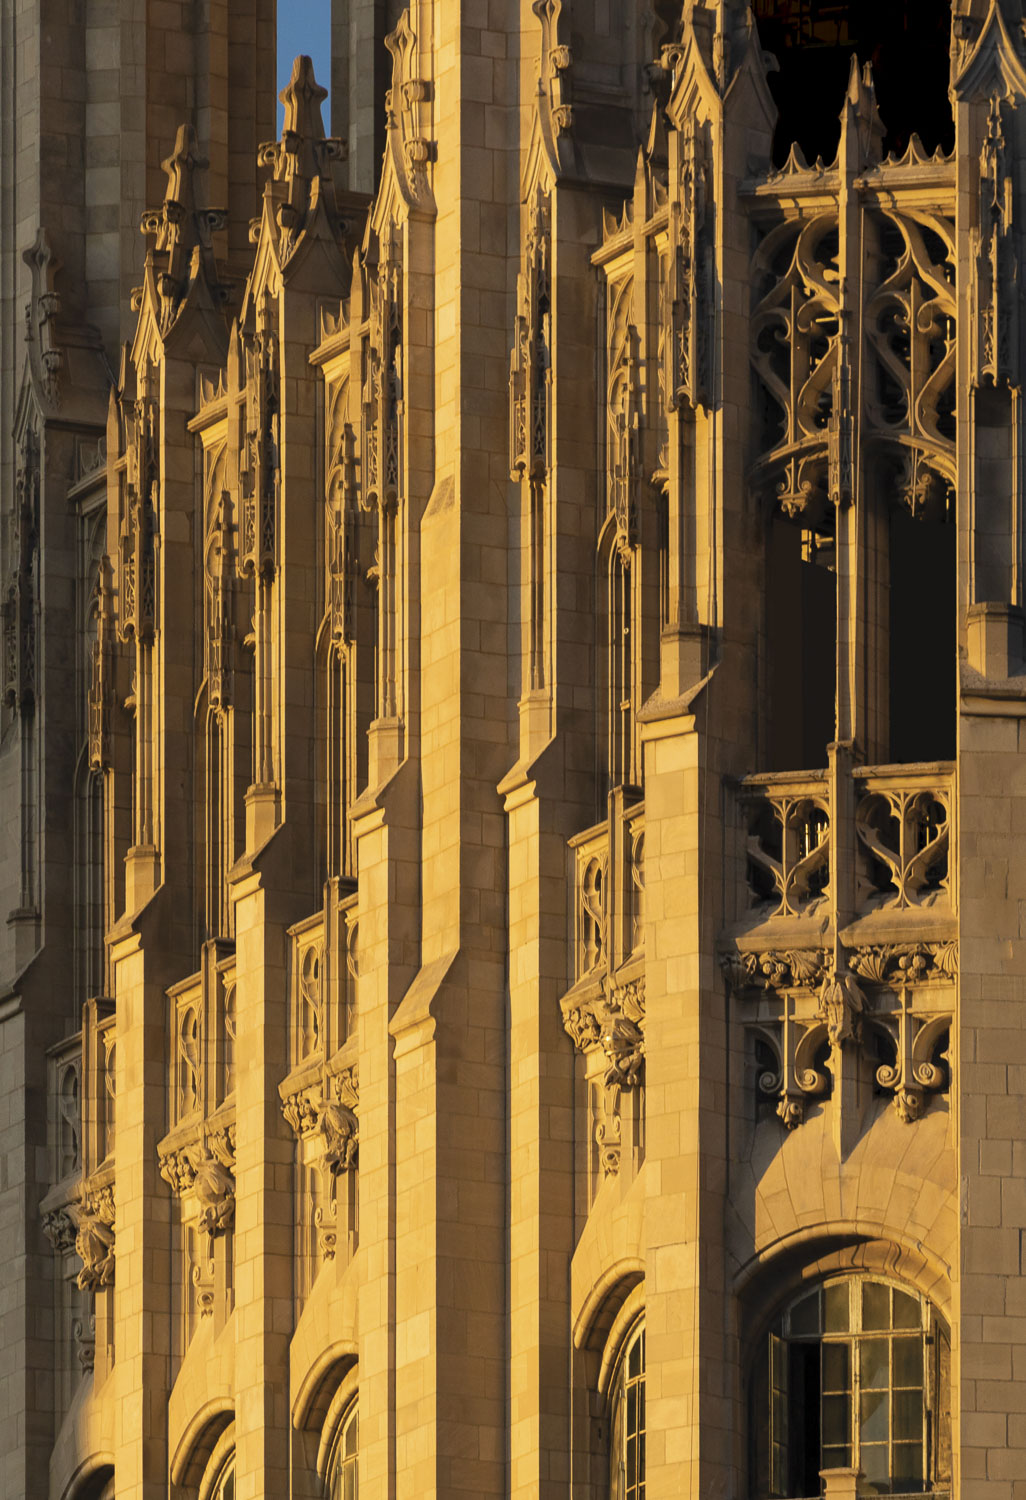 A close-up photograph of an upper section of the Chicago Tribune Building shot in late afternoon sun that turns the face of the building a glowing orange-red. Vertical buttresses run up the side of the building, dividing it into bays. The light-colored stone of the building is carved into Gothic forms like pointed arches, gargoyles, and plant motifs. Some of the bays end at the top with elaborate open tracery and are topped by a pinnacle.